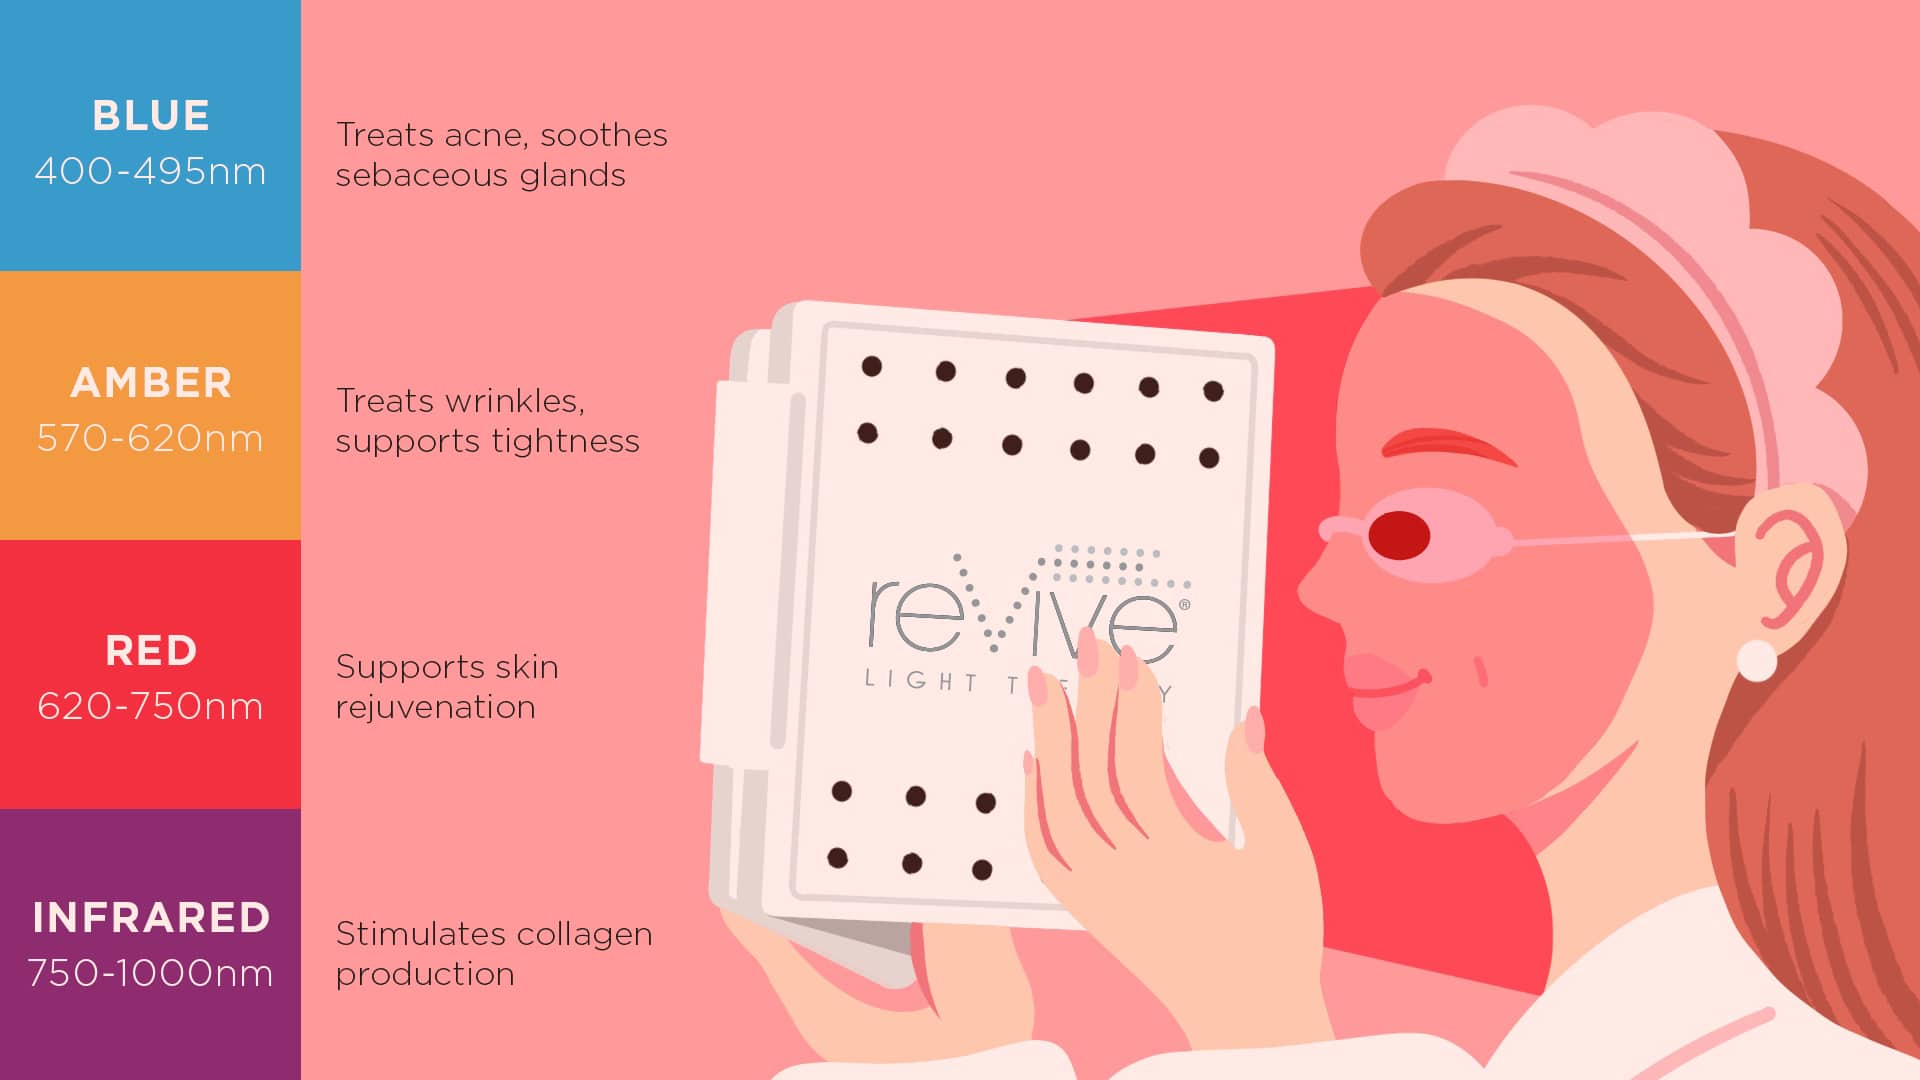 Light therapy, visible light colors and each color's application in skin treatments. Blue light (400-495nm) treats acne, soothes sebaceous glands. Amber light (570-620nm)treats wrinkles, supports tightness. Red light (620-750nm) supports skin rejuvenation. Infrared light (750-1000nm) stimulates collagen production.